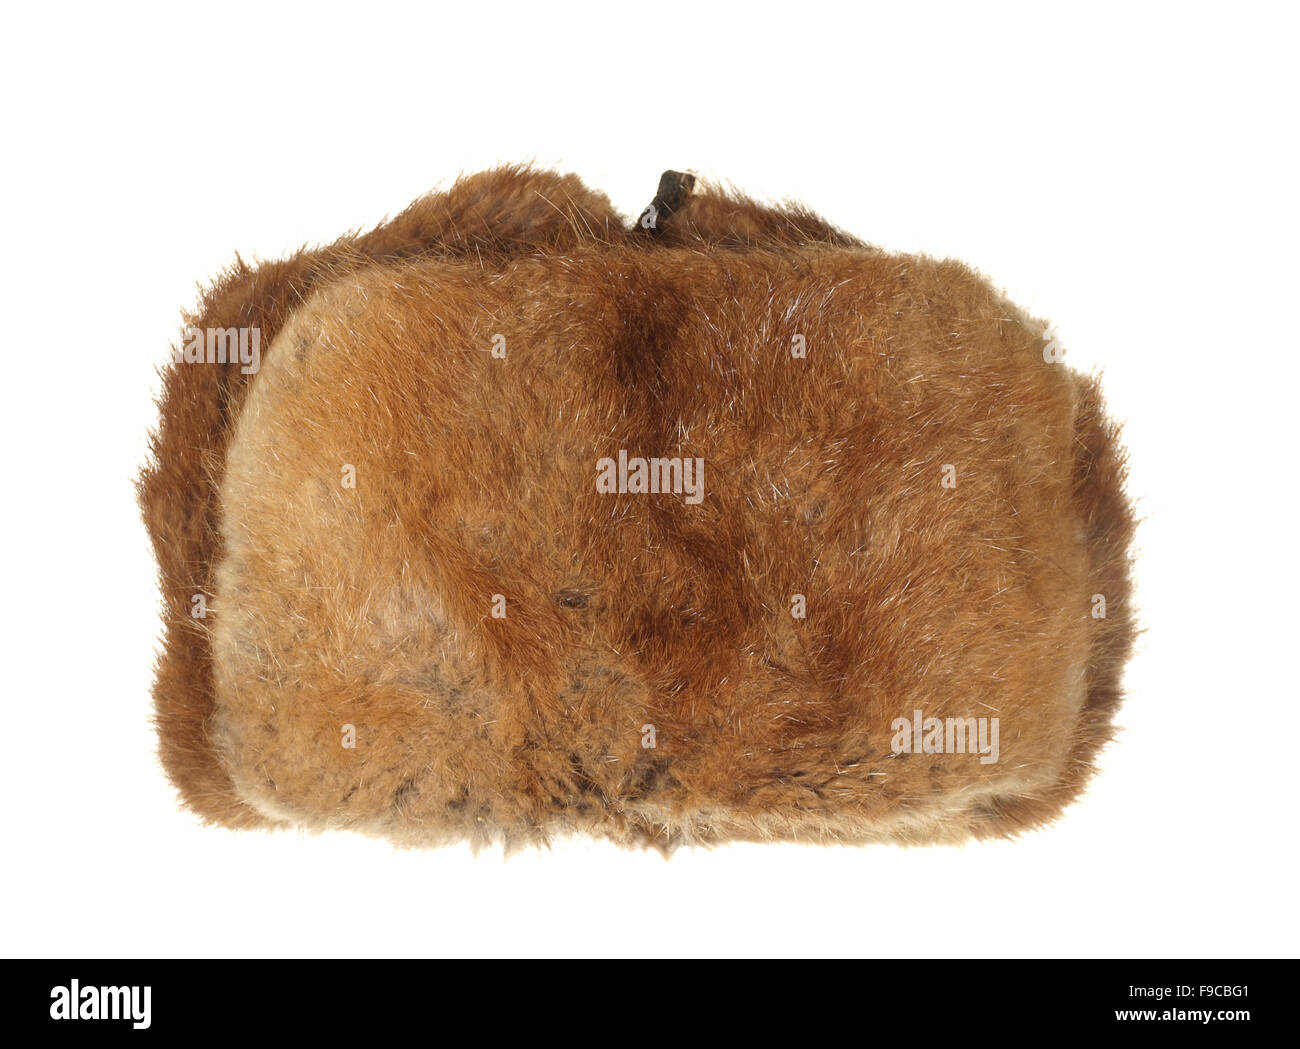 Winter fur hat brown isolated on white background. Stock Photo